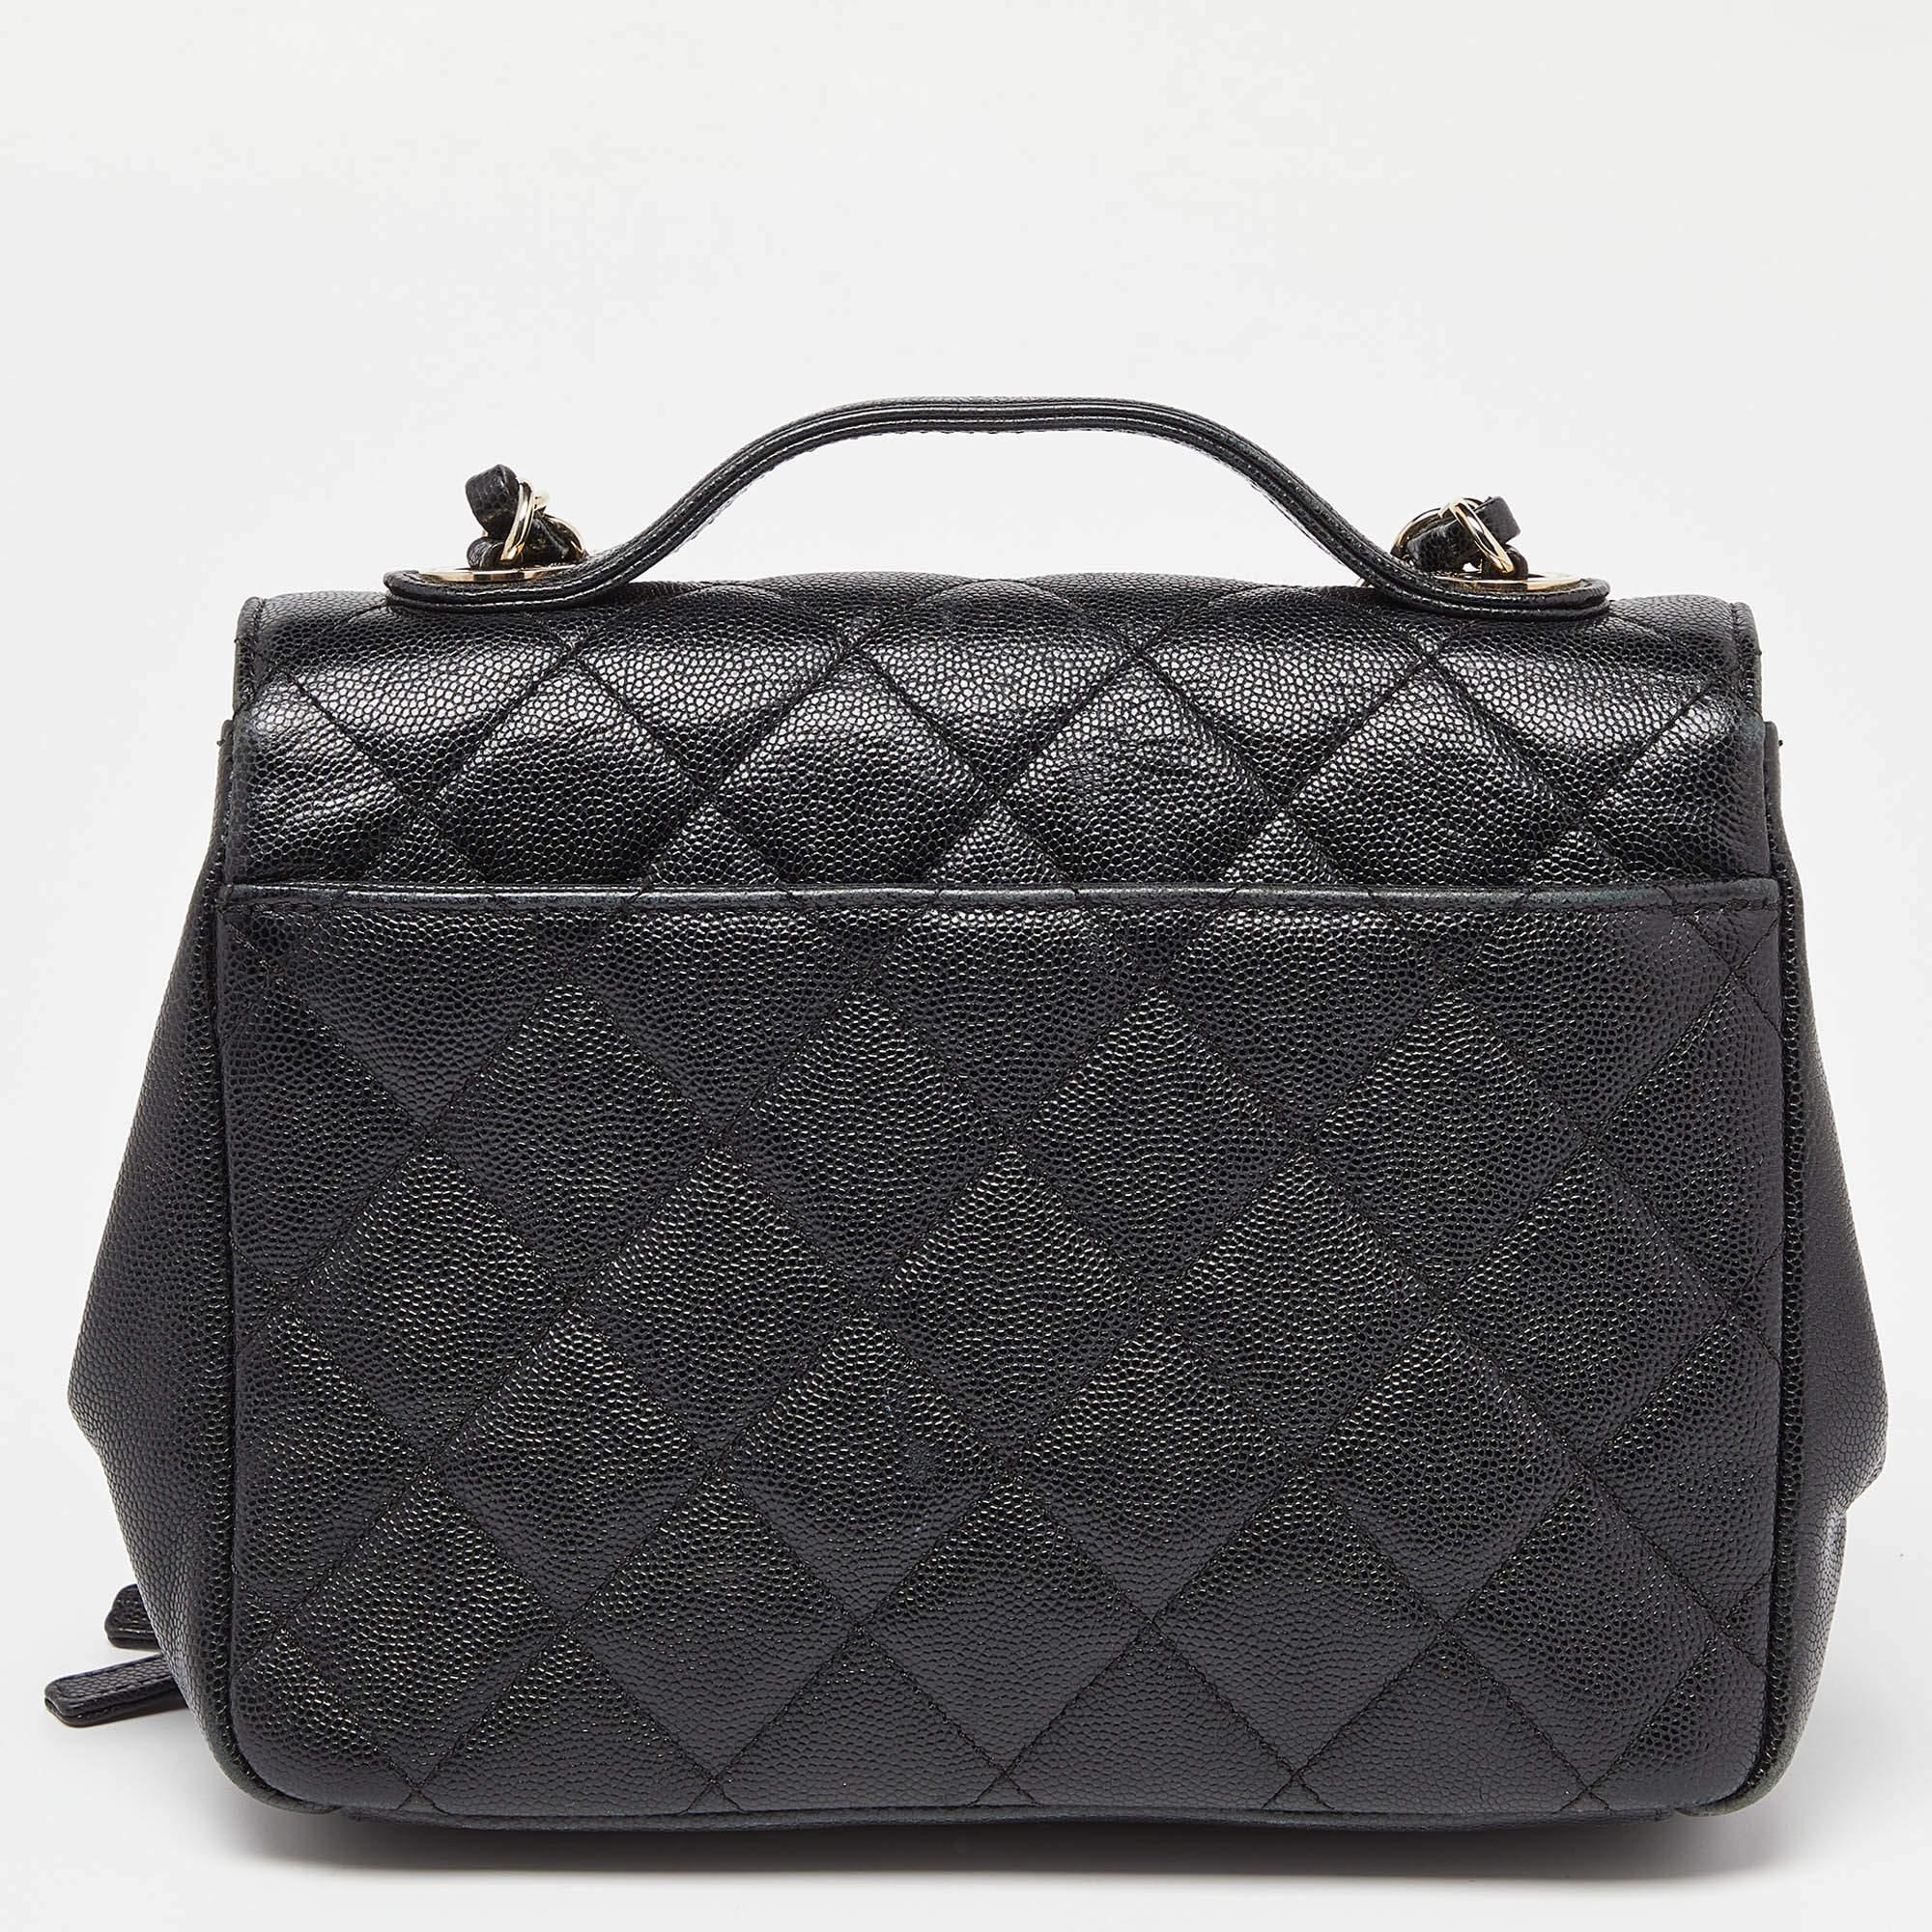 Chanel's luxurious Business Affinity Flap bag is a must-have in a well-curated wardrobe! Meticulously crafted and finished, this is a purchase you'll cherish.

Includes: Original Dustbag